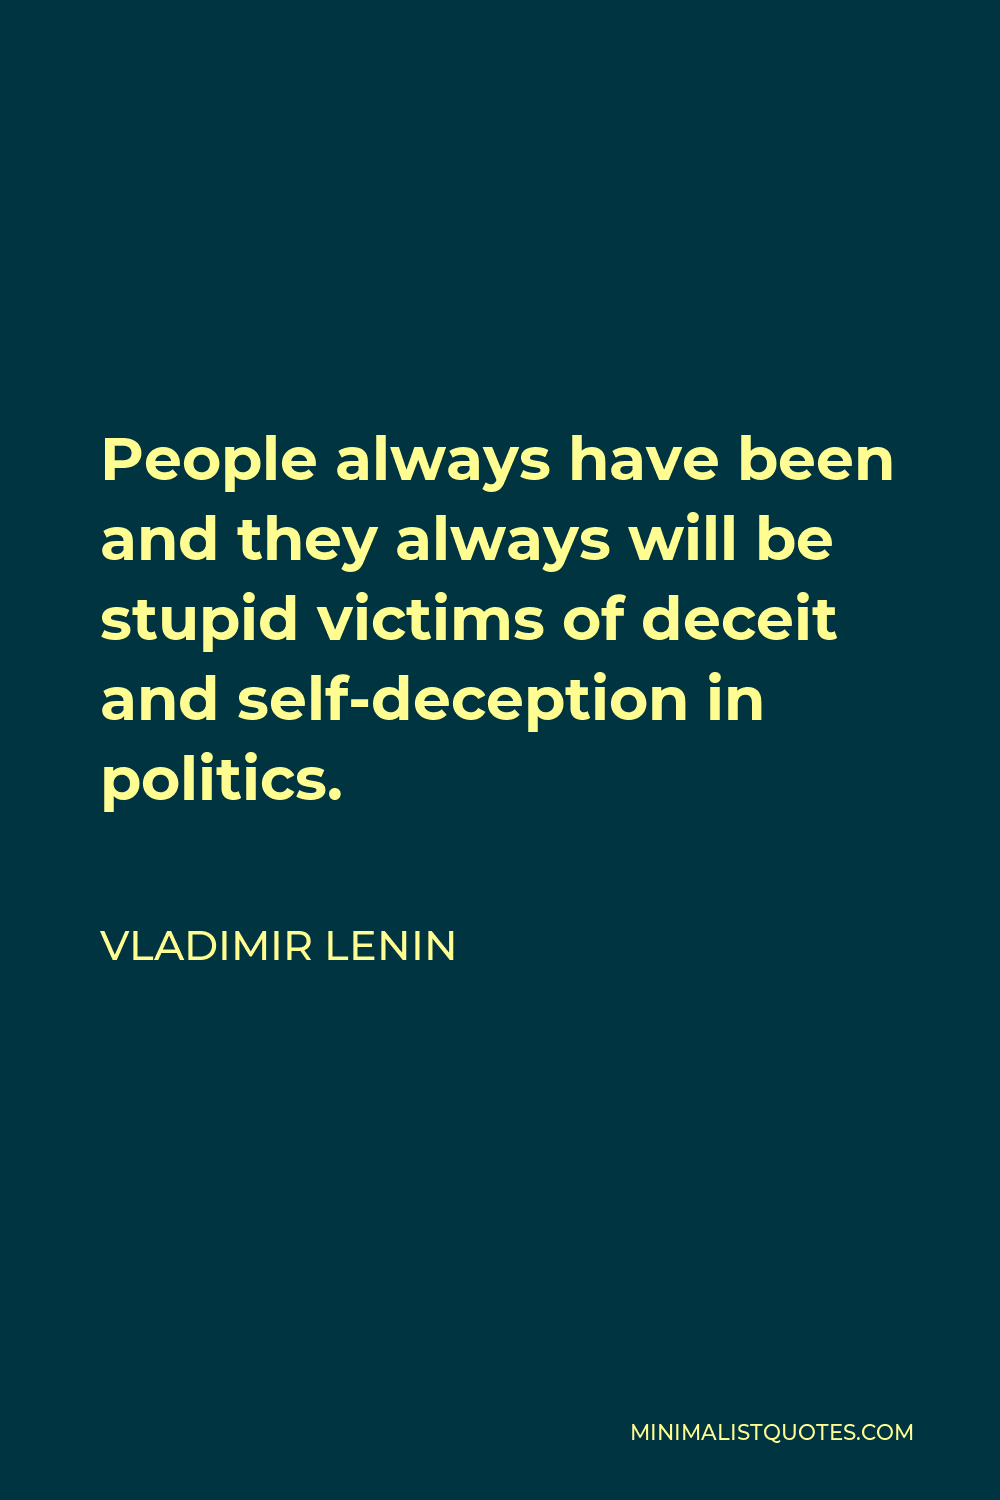 Vladimir Lenin Quote - People always have been and they always will be stupid victims of deceit and self-deception in politics.